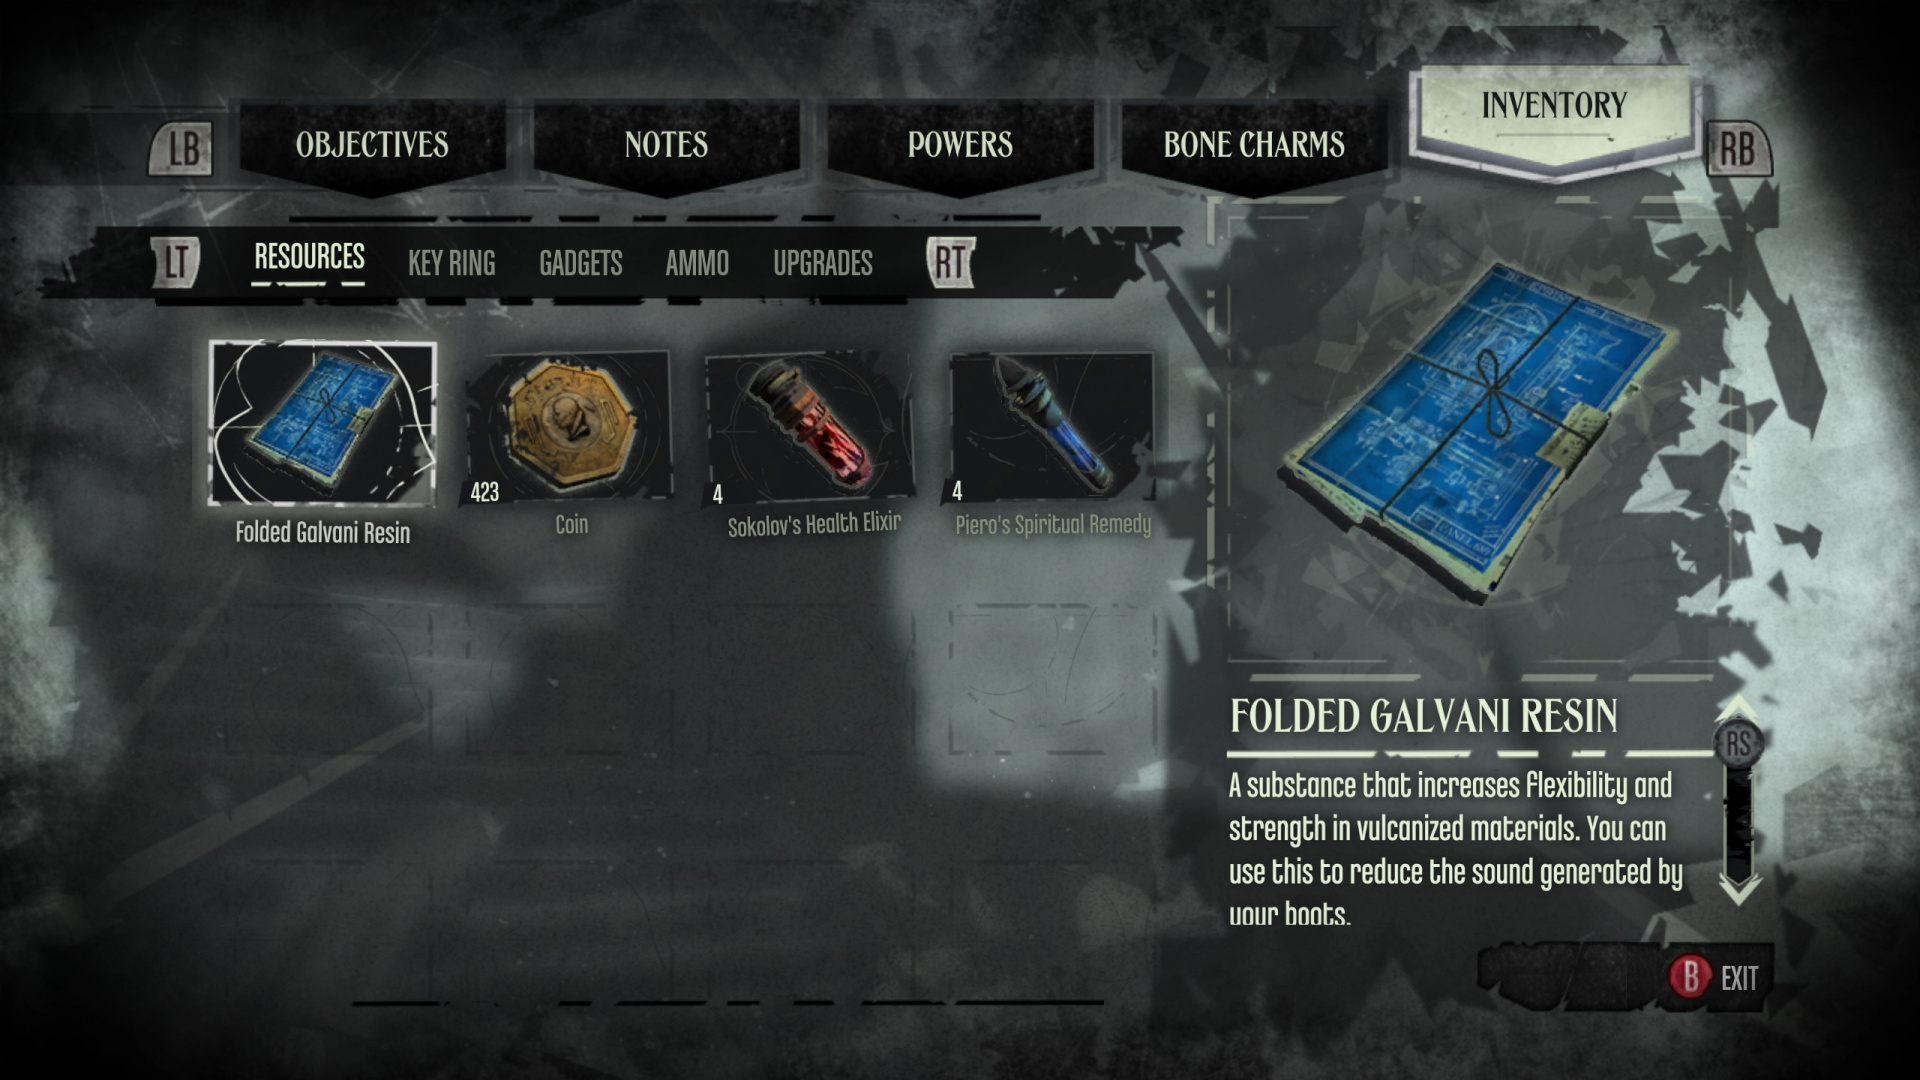 Dishonored 2, Interface In Game